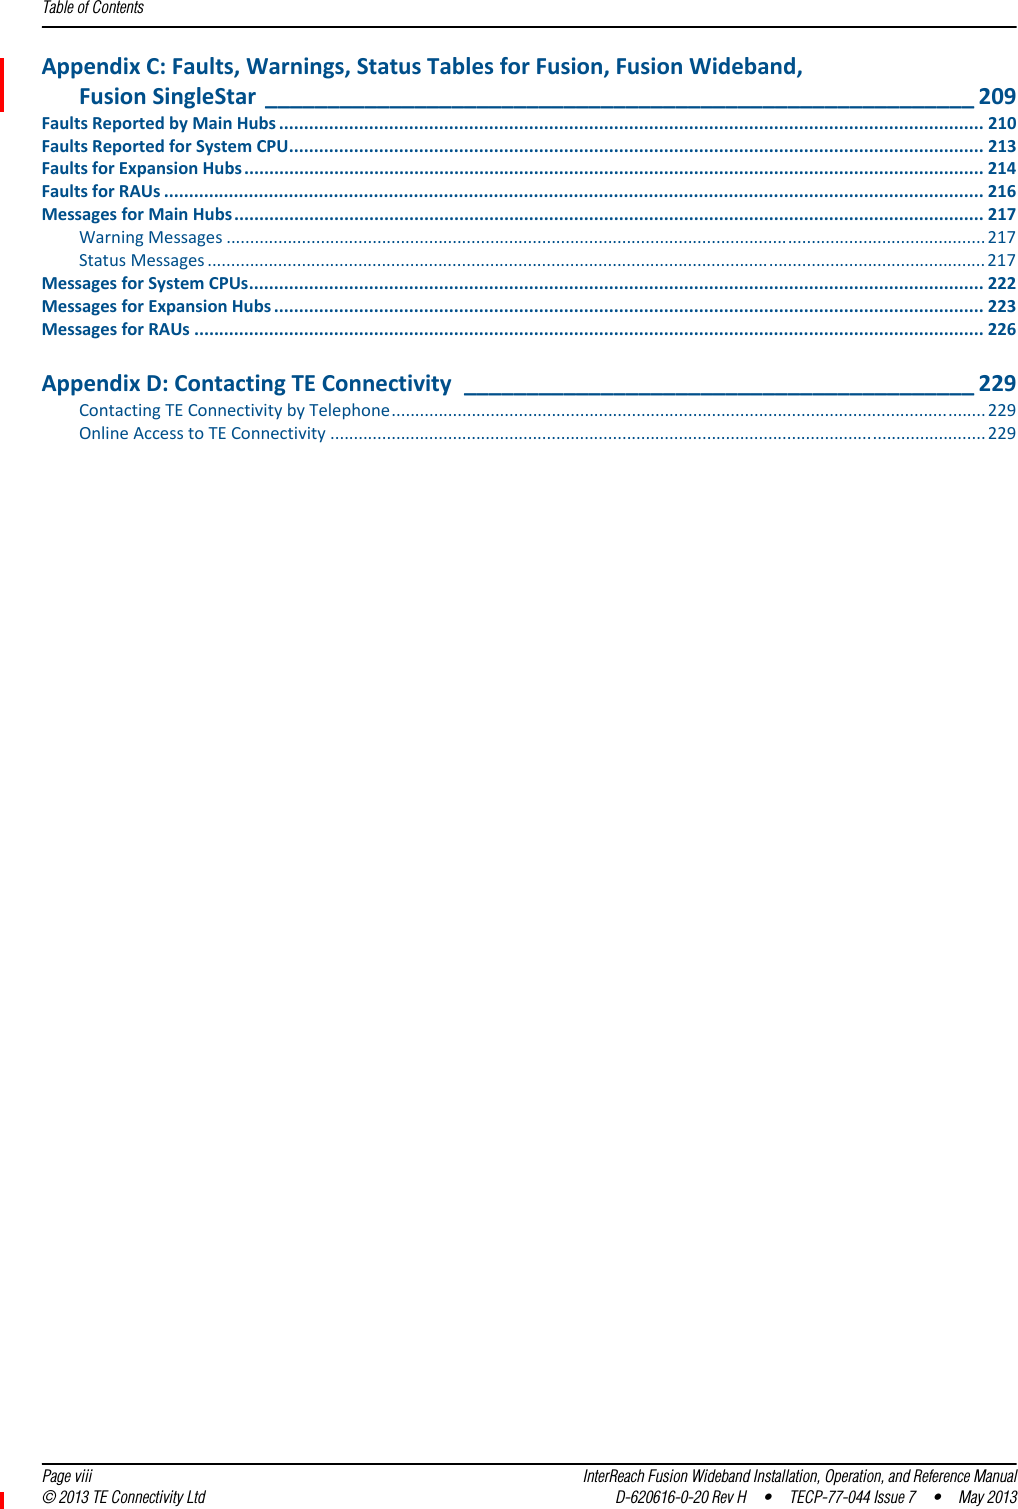 Table of Contents  Page viii InterReach Fusion Wideband Installation, Operation, and Reference Manual© 2013 TE Connectivity Ltd D-620616-0-20 Rev H  •  TECP-77-044 Issue 7  •  May 2013AppendixC:Faults,Warnings,StatusTablesforFusion,FusionWideband,FusionSingleStar _________________________________________________________ 209FaultsReportedbyMainHubs ............................................................................................................................................. 210FaultsReportedforSystemCPU........................................................................................................................................... 213FaultsforExpansionHubs.................................................................................................................................................... 214FaultsforRAUs .................................................................................................................................................................... 216MessagesforMainHubs...................................................................................................................................................... 217WarningMessages .................................................................................................................................................................217StatusMessages .....................................................................................................................................................................217MessagesforSystemCPUs................................................................................................................................................... 222MessagesforExpansionHubs .............................................................................................................................................. 223MessagesforRAUs .............................................................................................................................................................. 226AppendixD:ContactingTEConnectivity _________________________________________ 229ContactingTEConnectivitybyTelephone.............................................................................................................................. 229OnlineAccesstoTEConnectivity ...........................................................................................................................................229